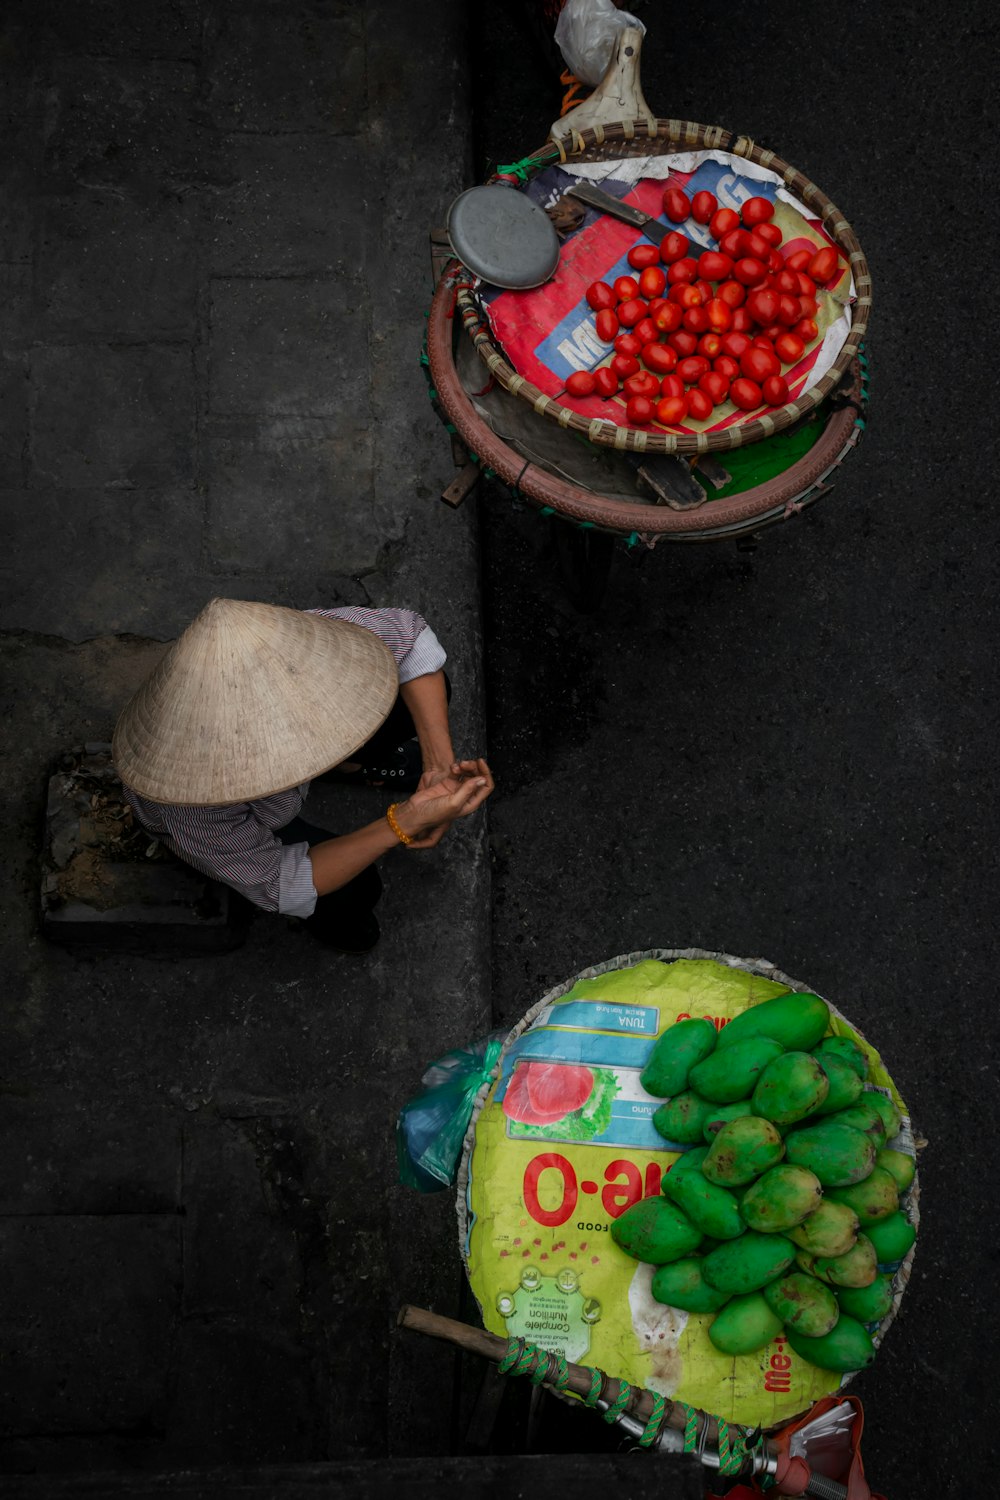 a person with a hat standing next to two baskets of fruit